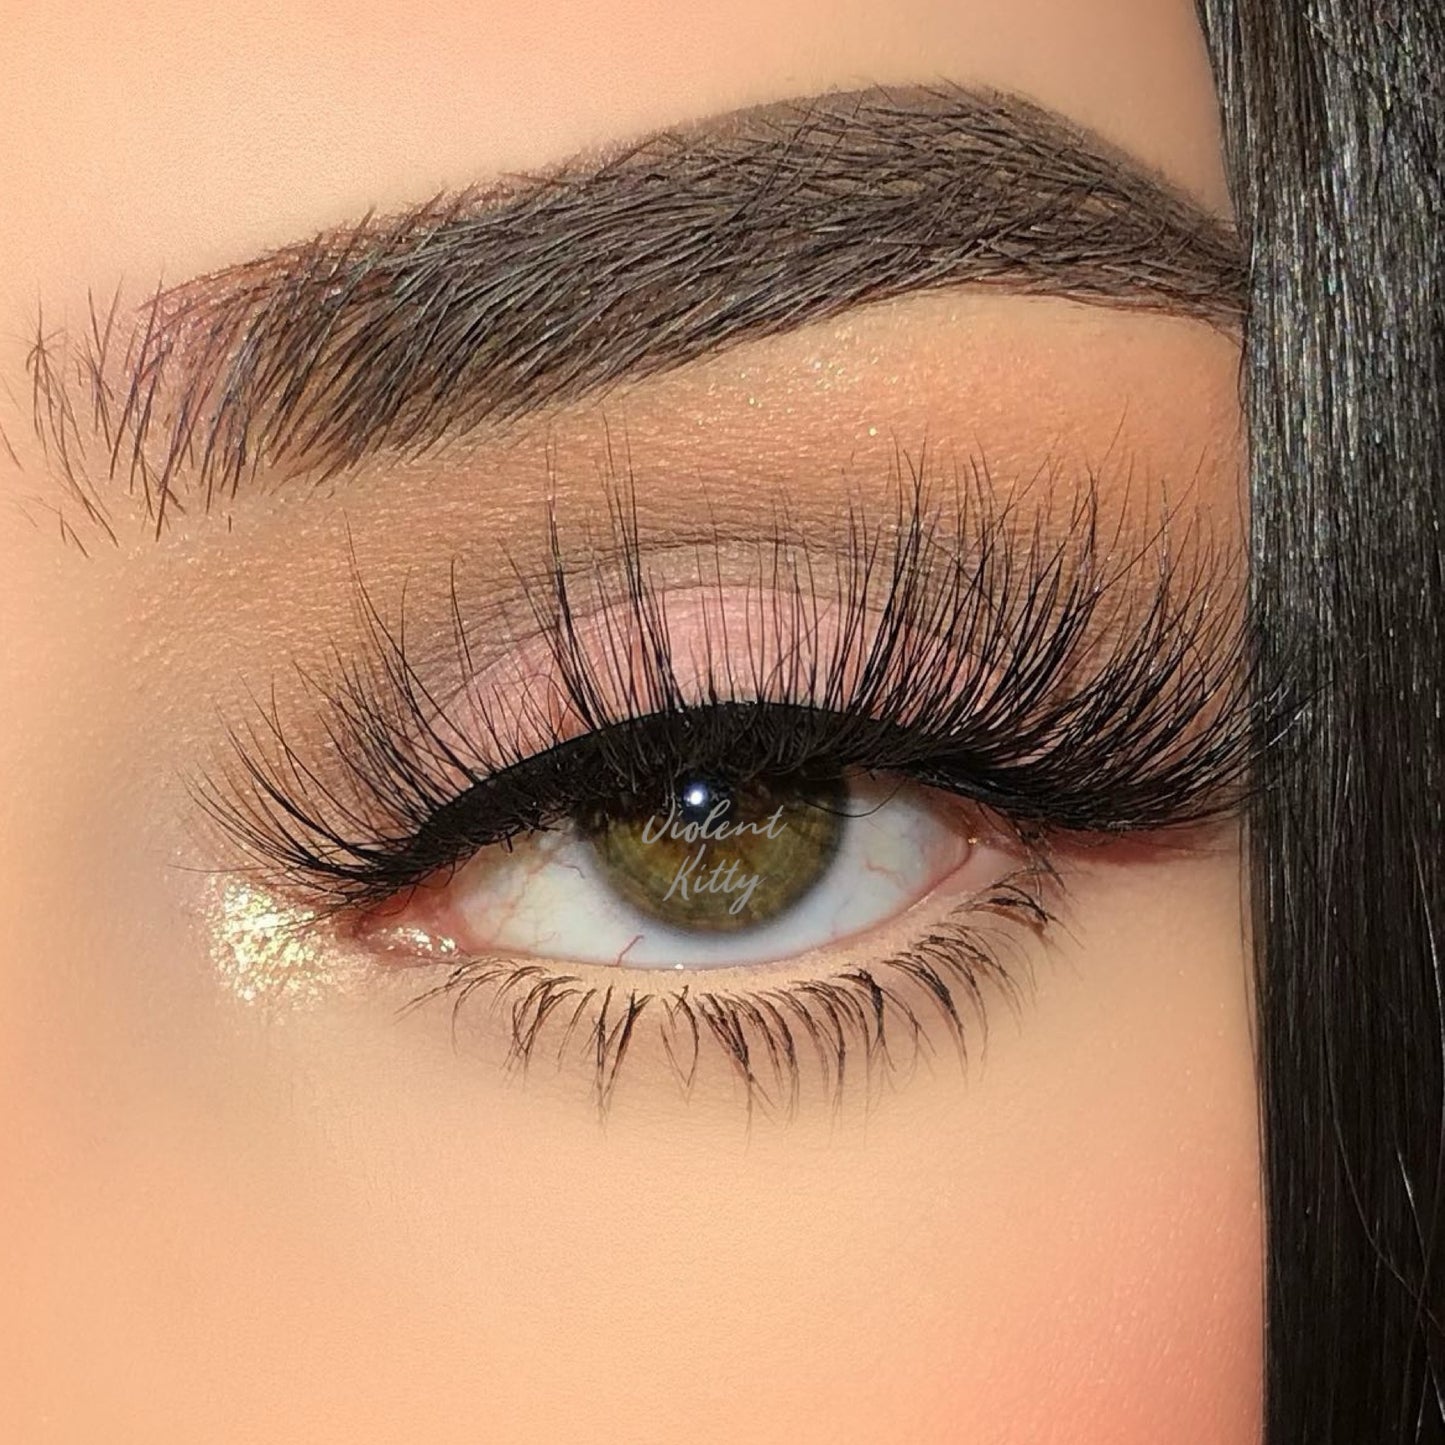 Baby Doll lashes